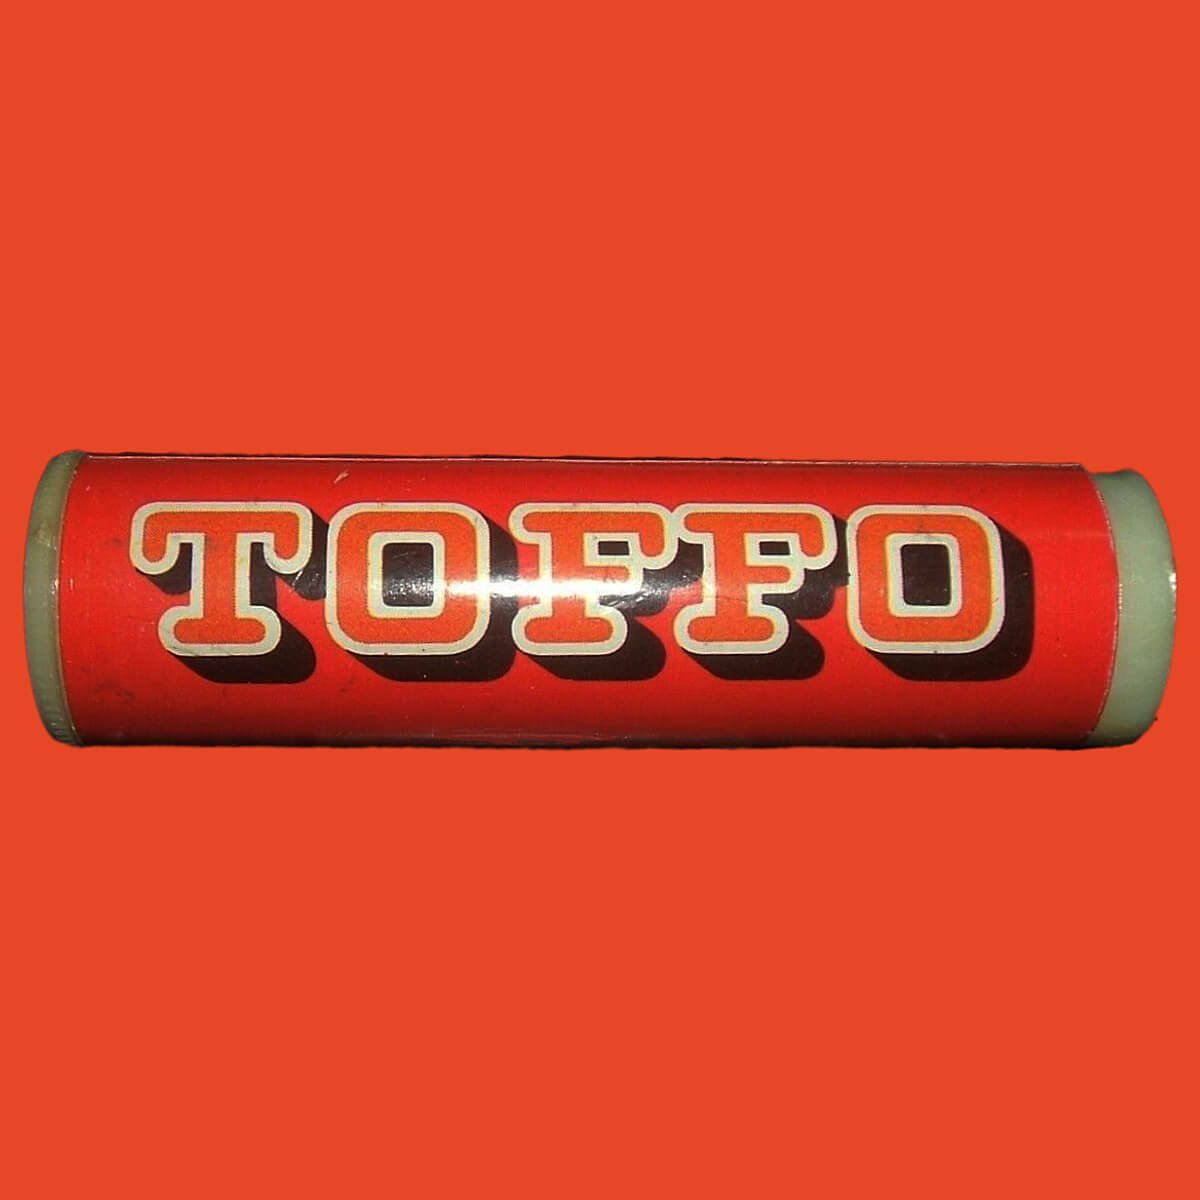 Toffo pencil sharpener from the 1980s, tubular shaped